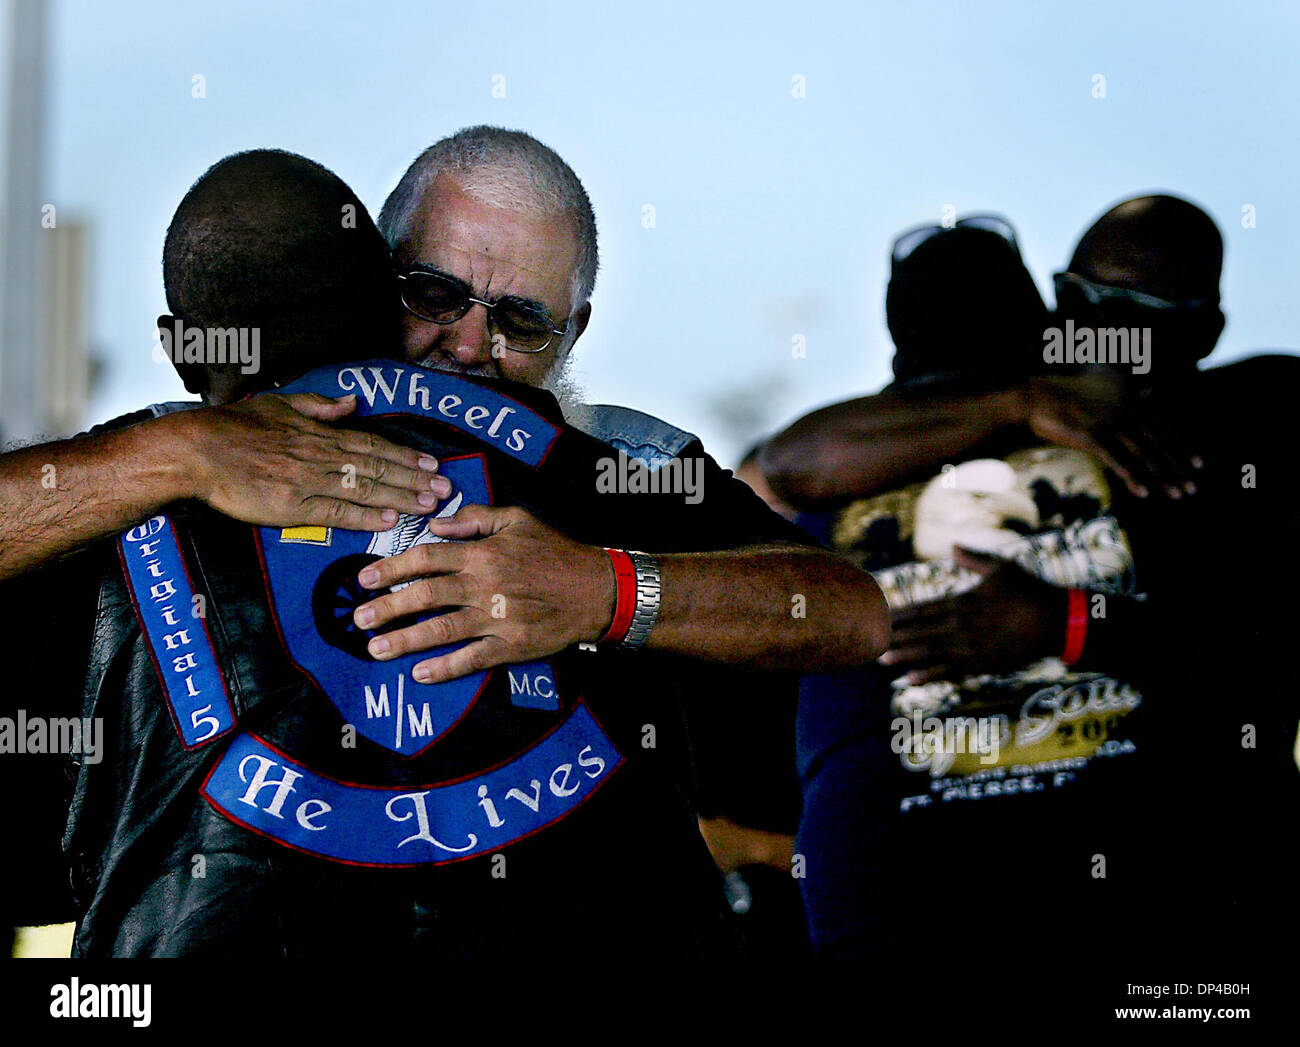 Aug 04, 2006; Fort Pierce, FL, USA; than Gramm, facing, of the Christian Motorcyclists Association, hugs Harry Gumby, left, during the National Bikers Roundup at the St. Lucie County Fairgrounds after a Sunday morning church service. Mandatory Credit: Photo by Meghan McCarthy/Palm Beach Post/ZUMA Press. (©) Copyright 2006 by Palm Beach Post Stock Photo